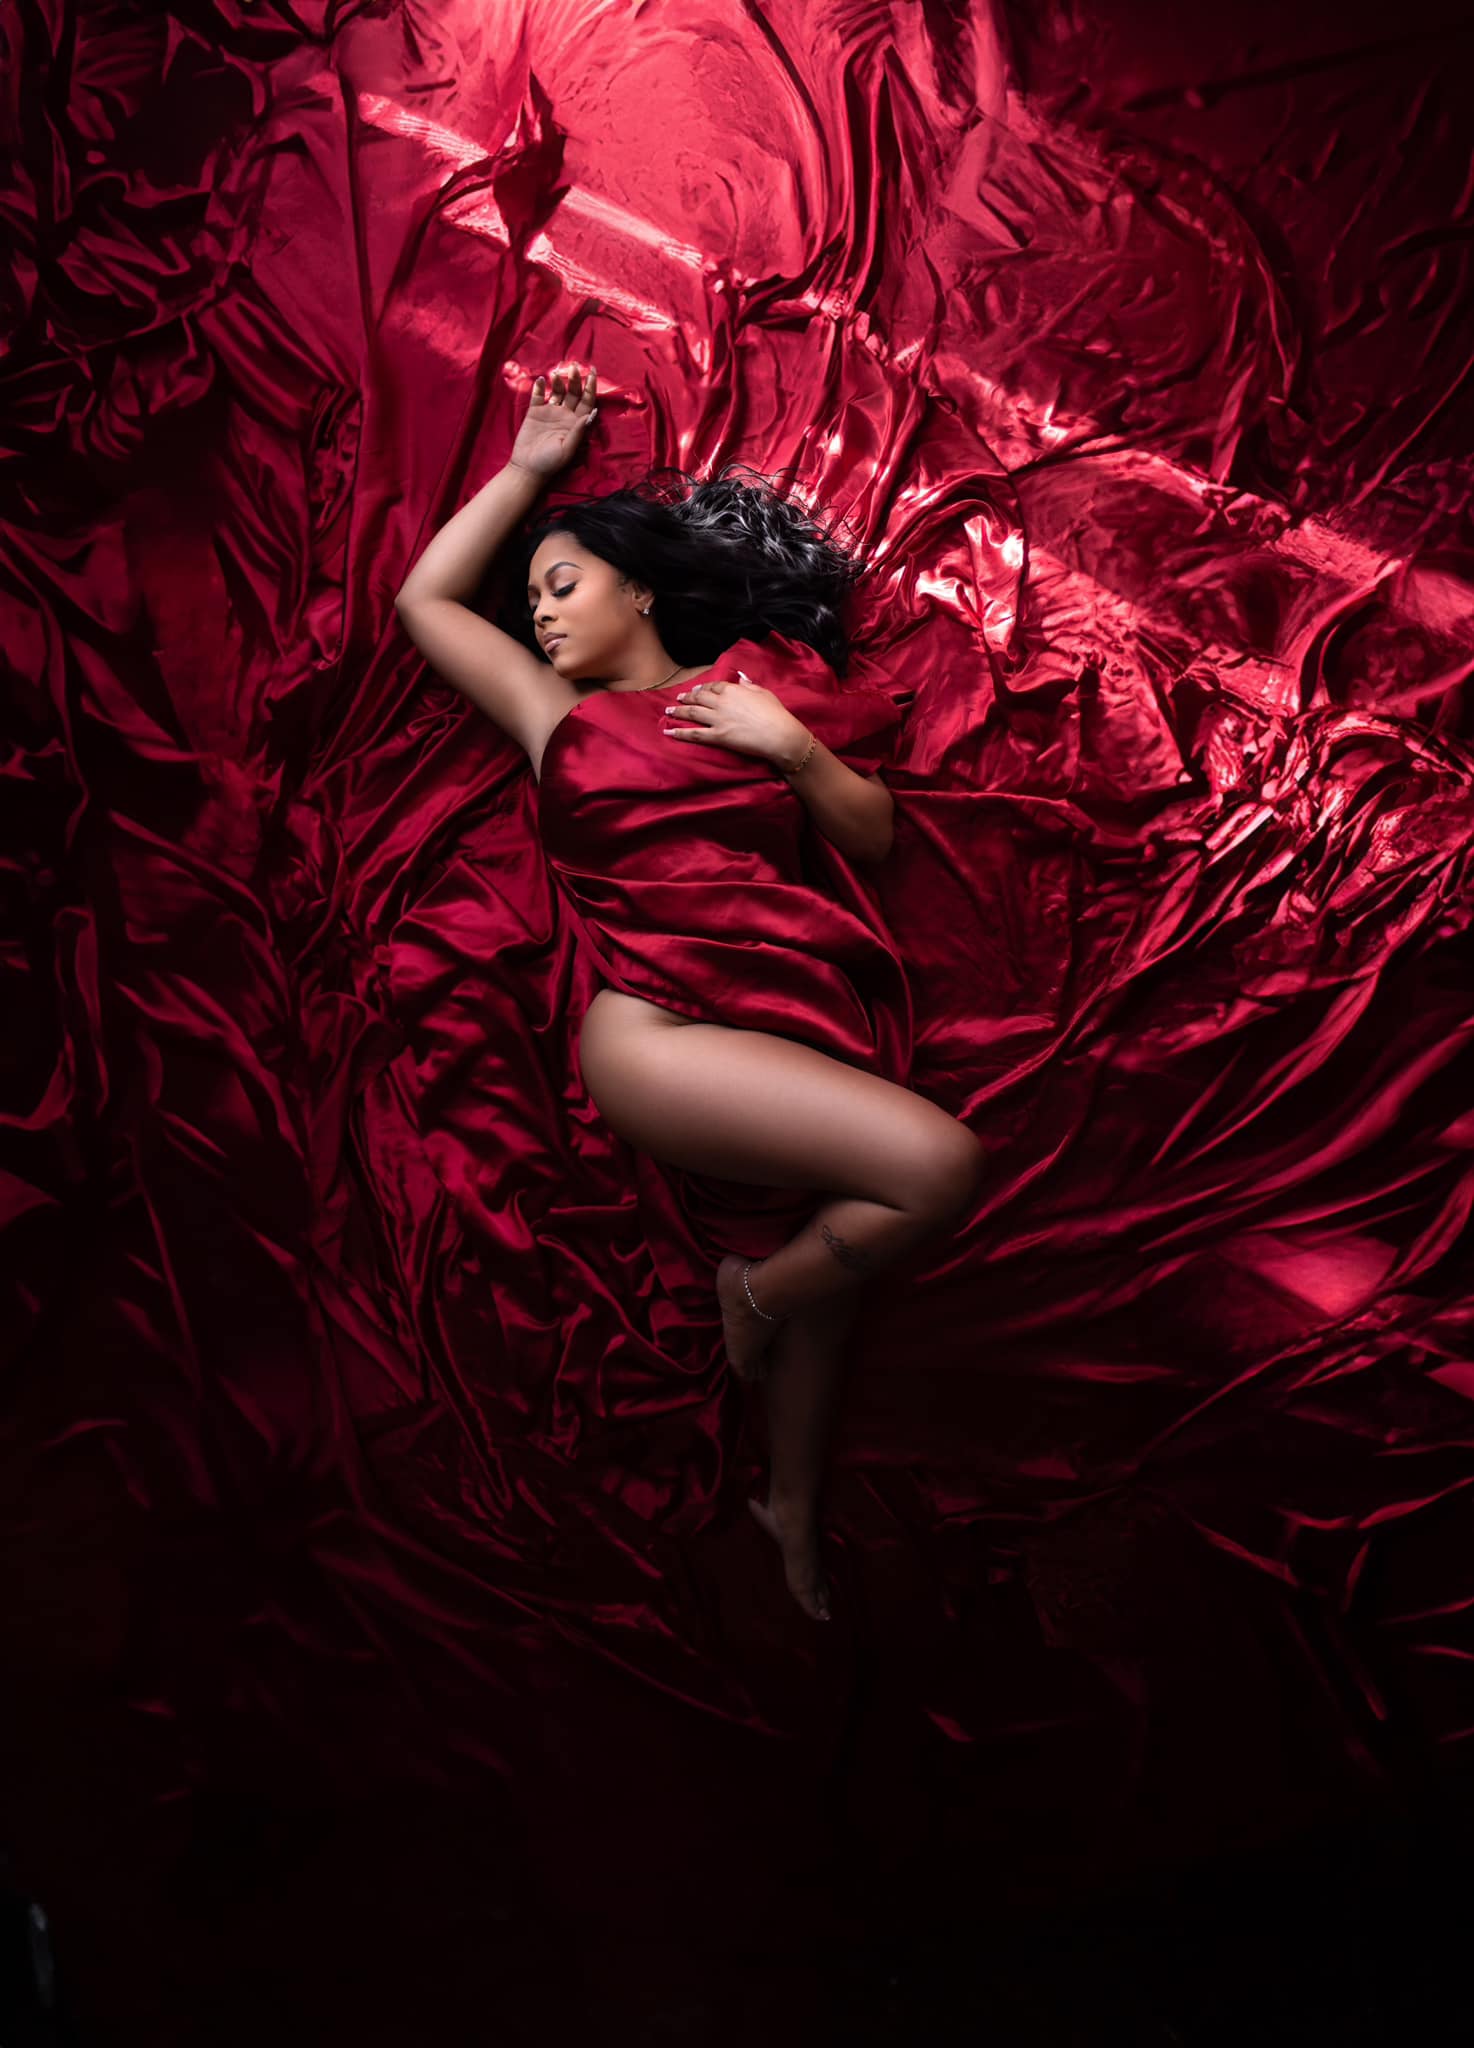 Atlanta boudoir photography featuring a black woman lying on red satin sheets.